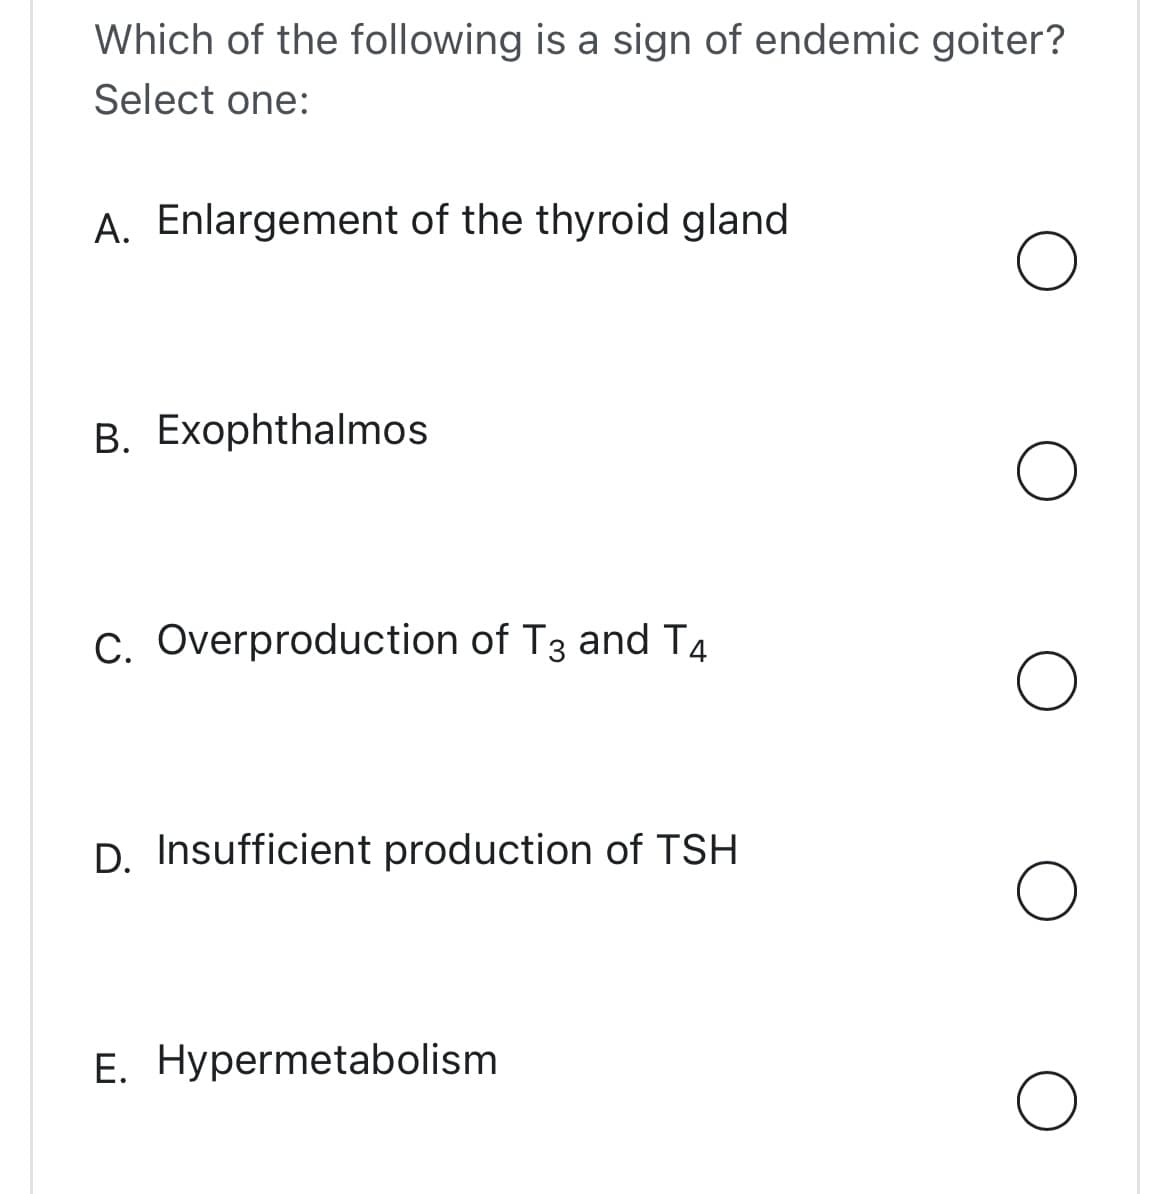 Which of the following is a sign of endemic goiter?
Select one:
A. Enlargement of the thyroid gland
B. Exophthalmos
C. Overproduction of T3 and T4
D. Insufficient production of TSH
E. Hypermetabolism
O
O
O
O
O